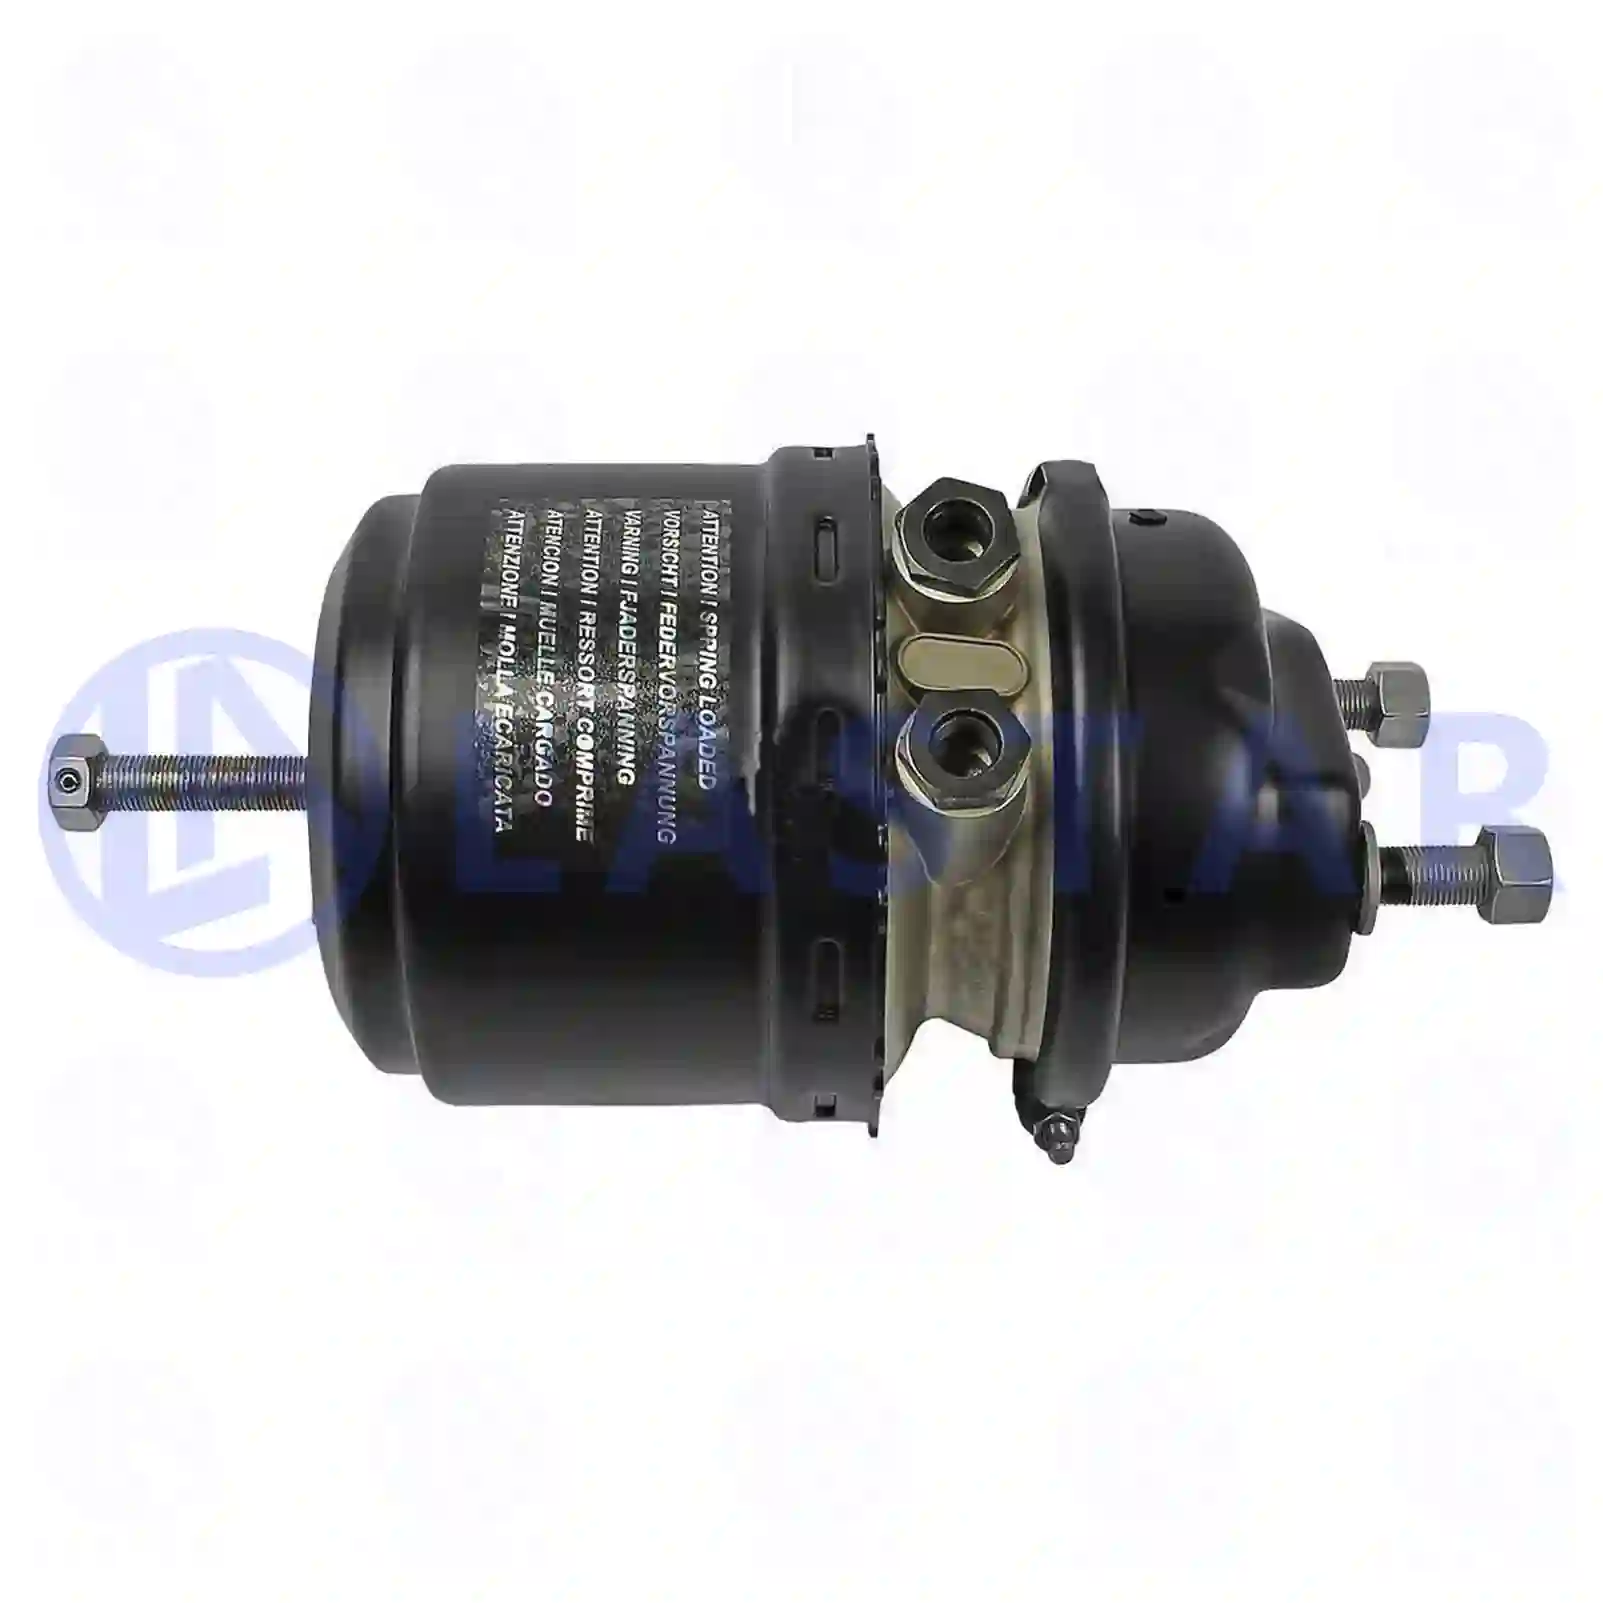  Spring brake cylinder, right || Lastar Spare Part | Truck Spare Parts, Auotomotive Spare Parts